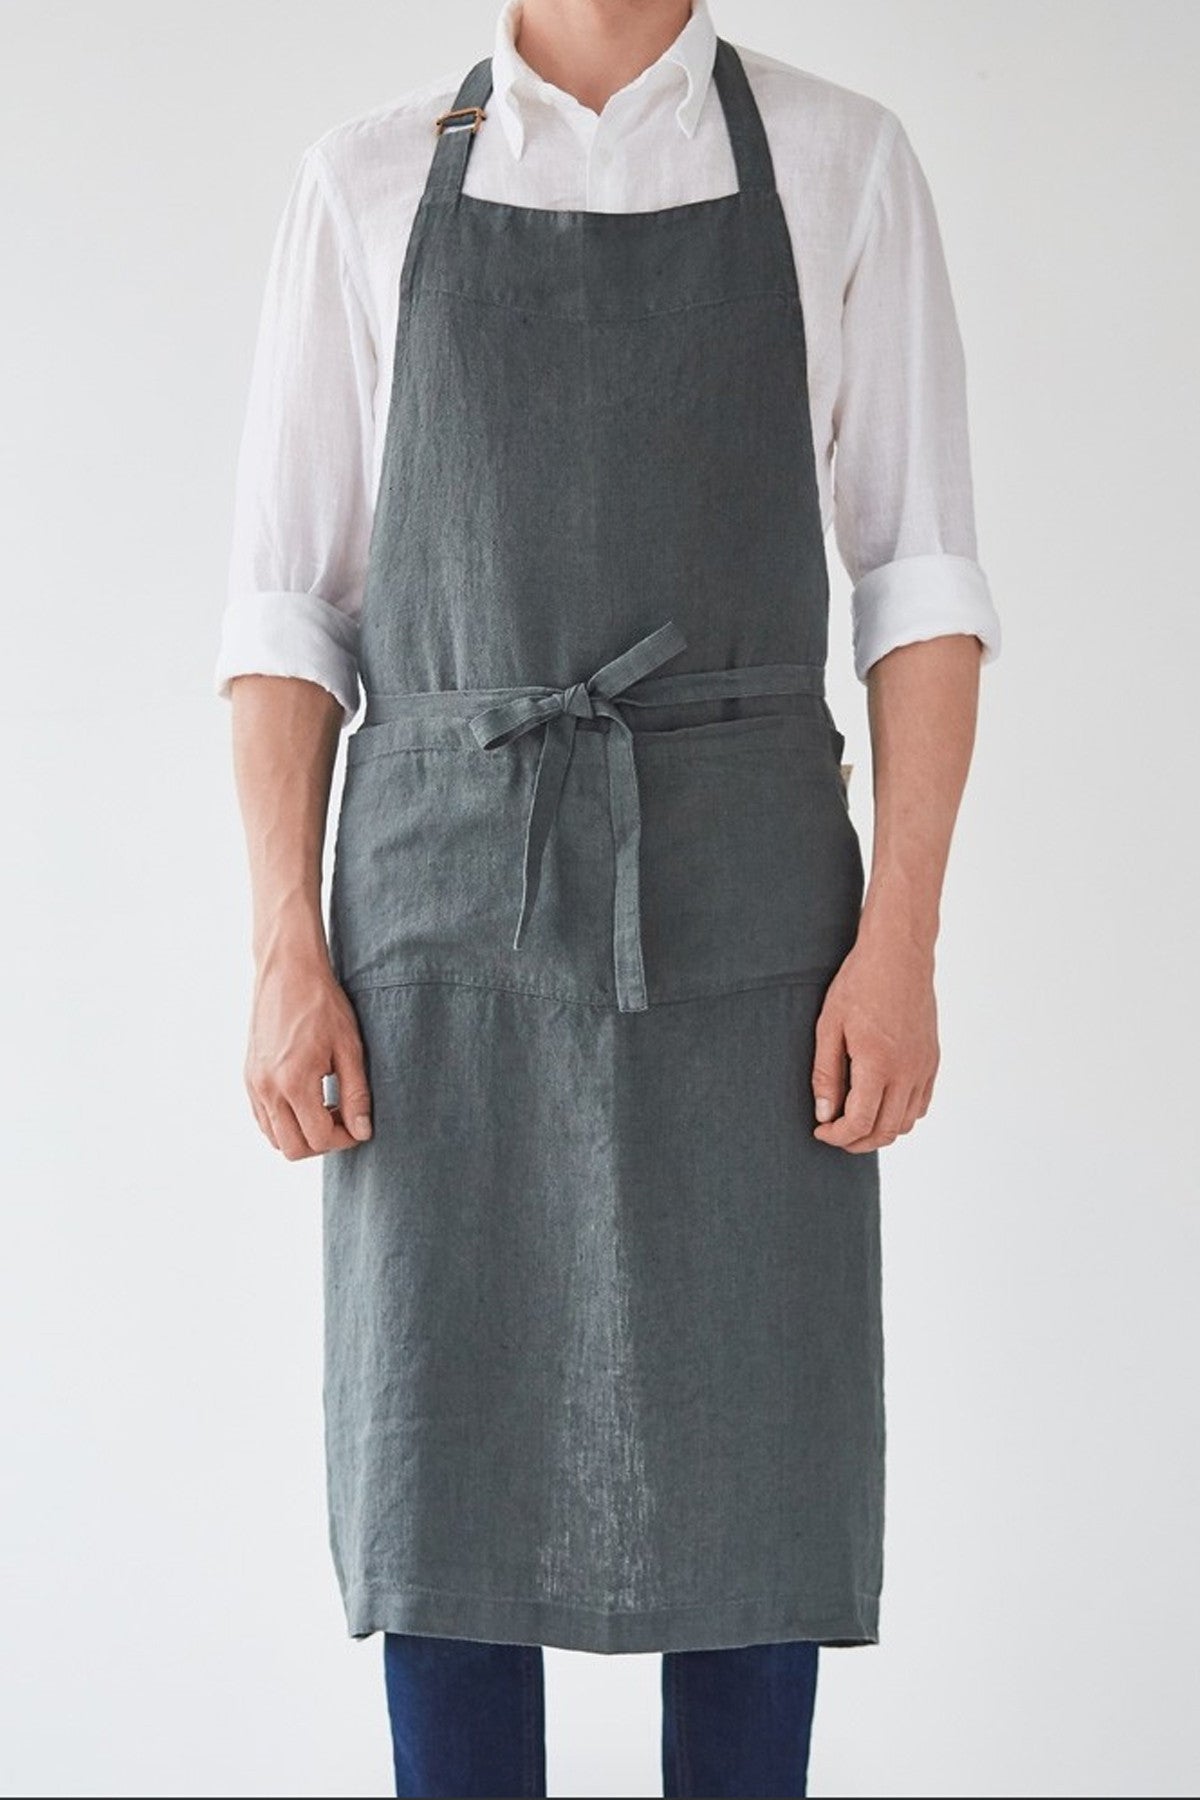 CHEF APRON, forest green